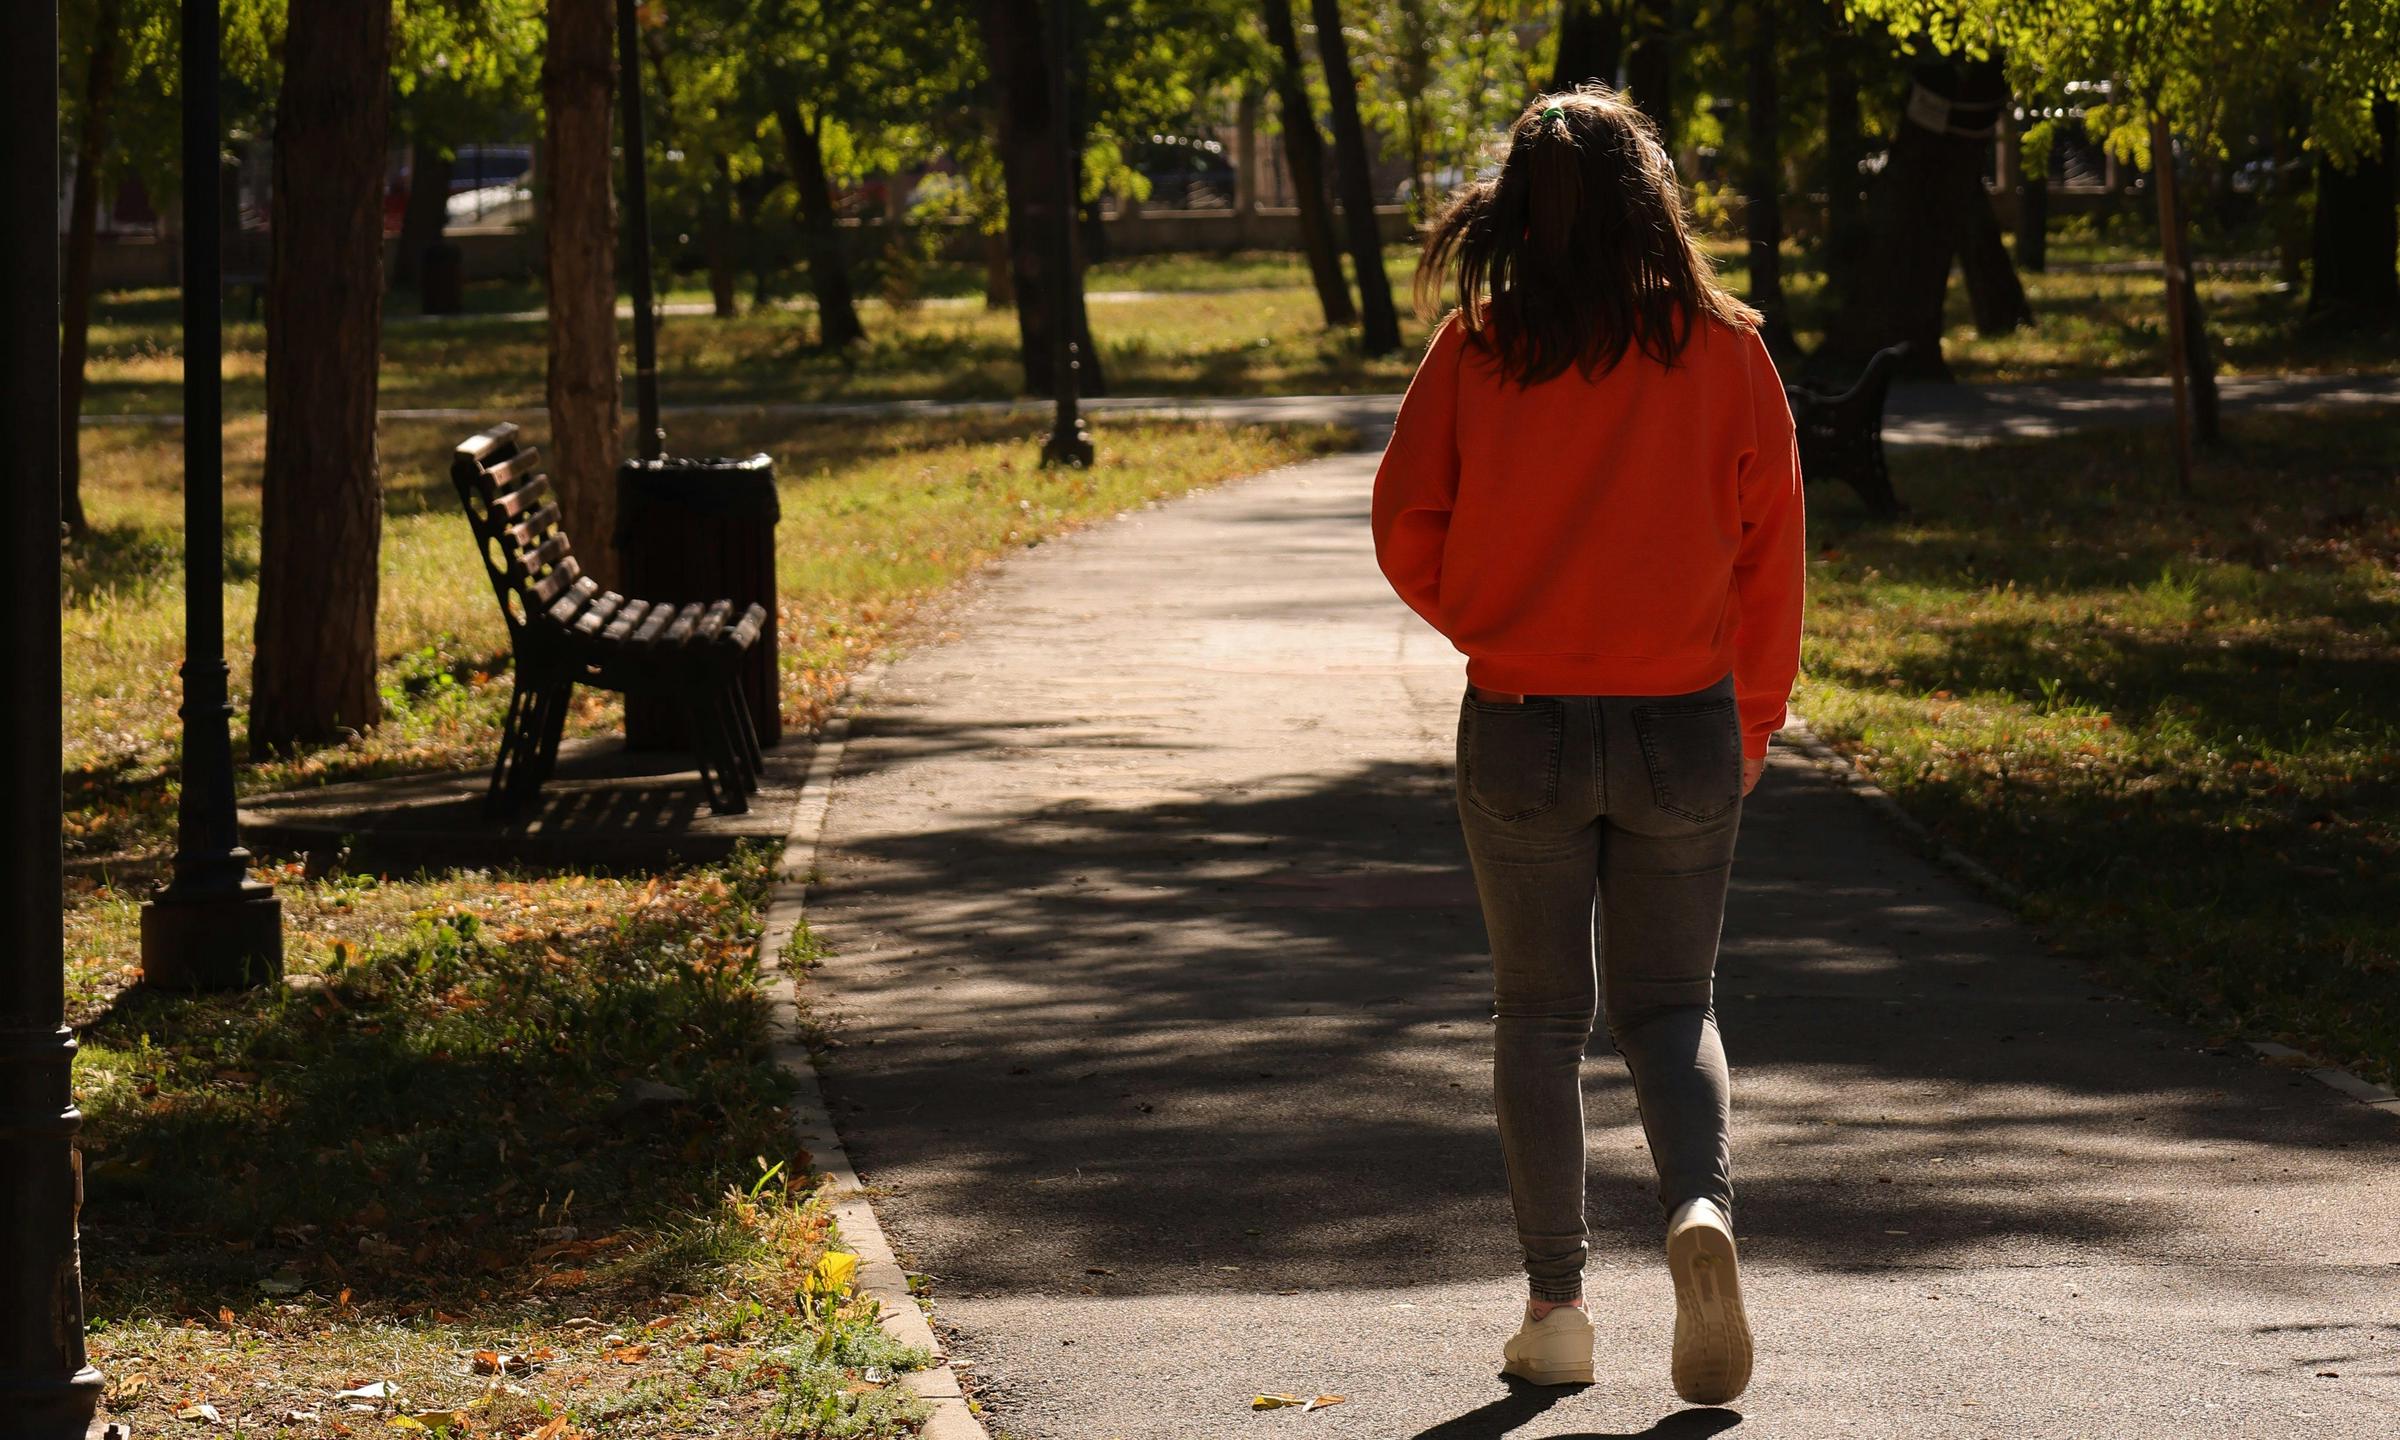 A woman walking away in a park | Source: Pexels